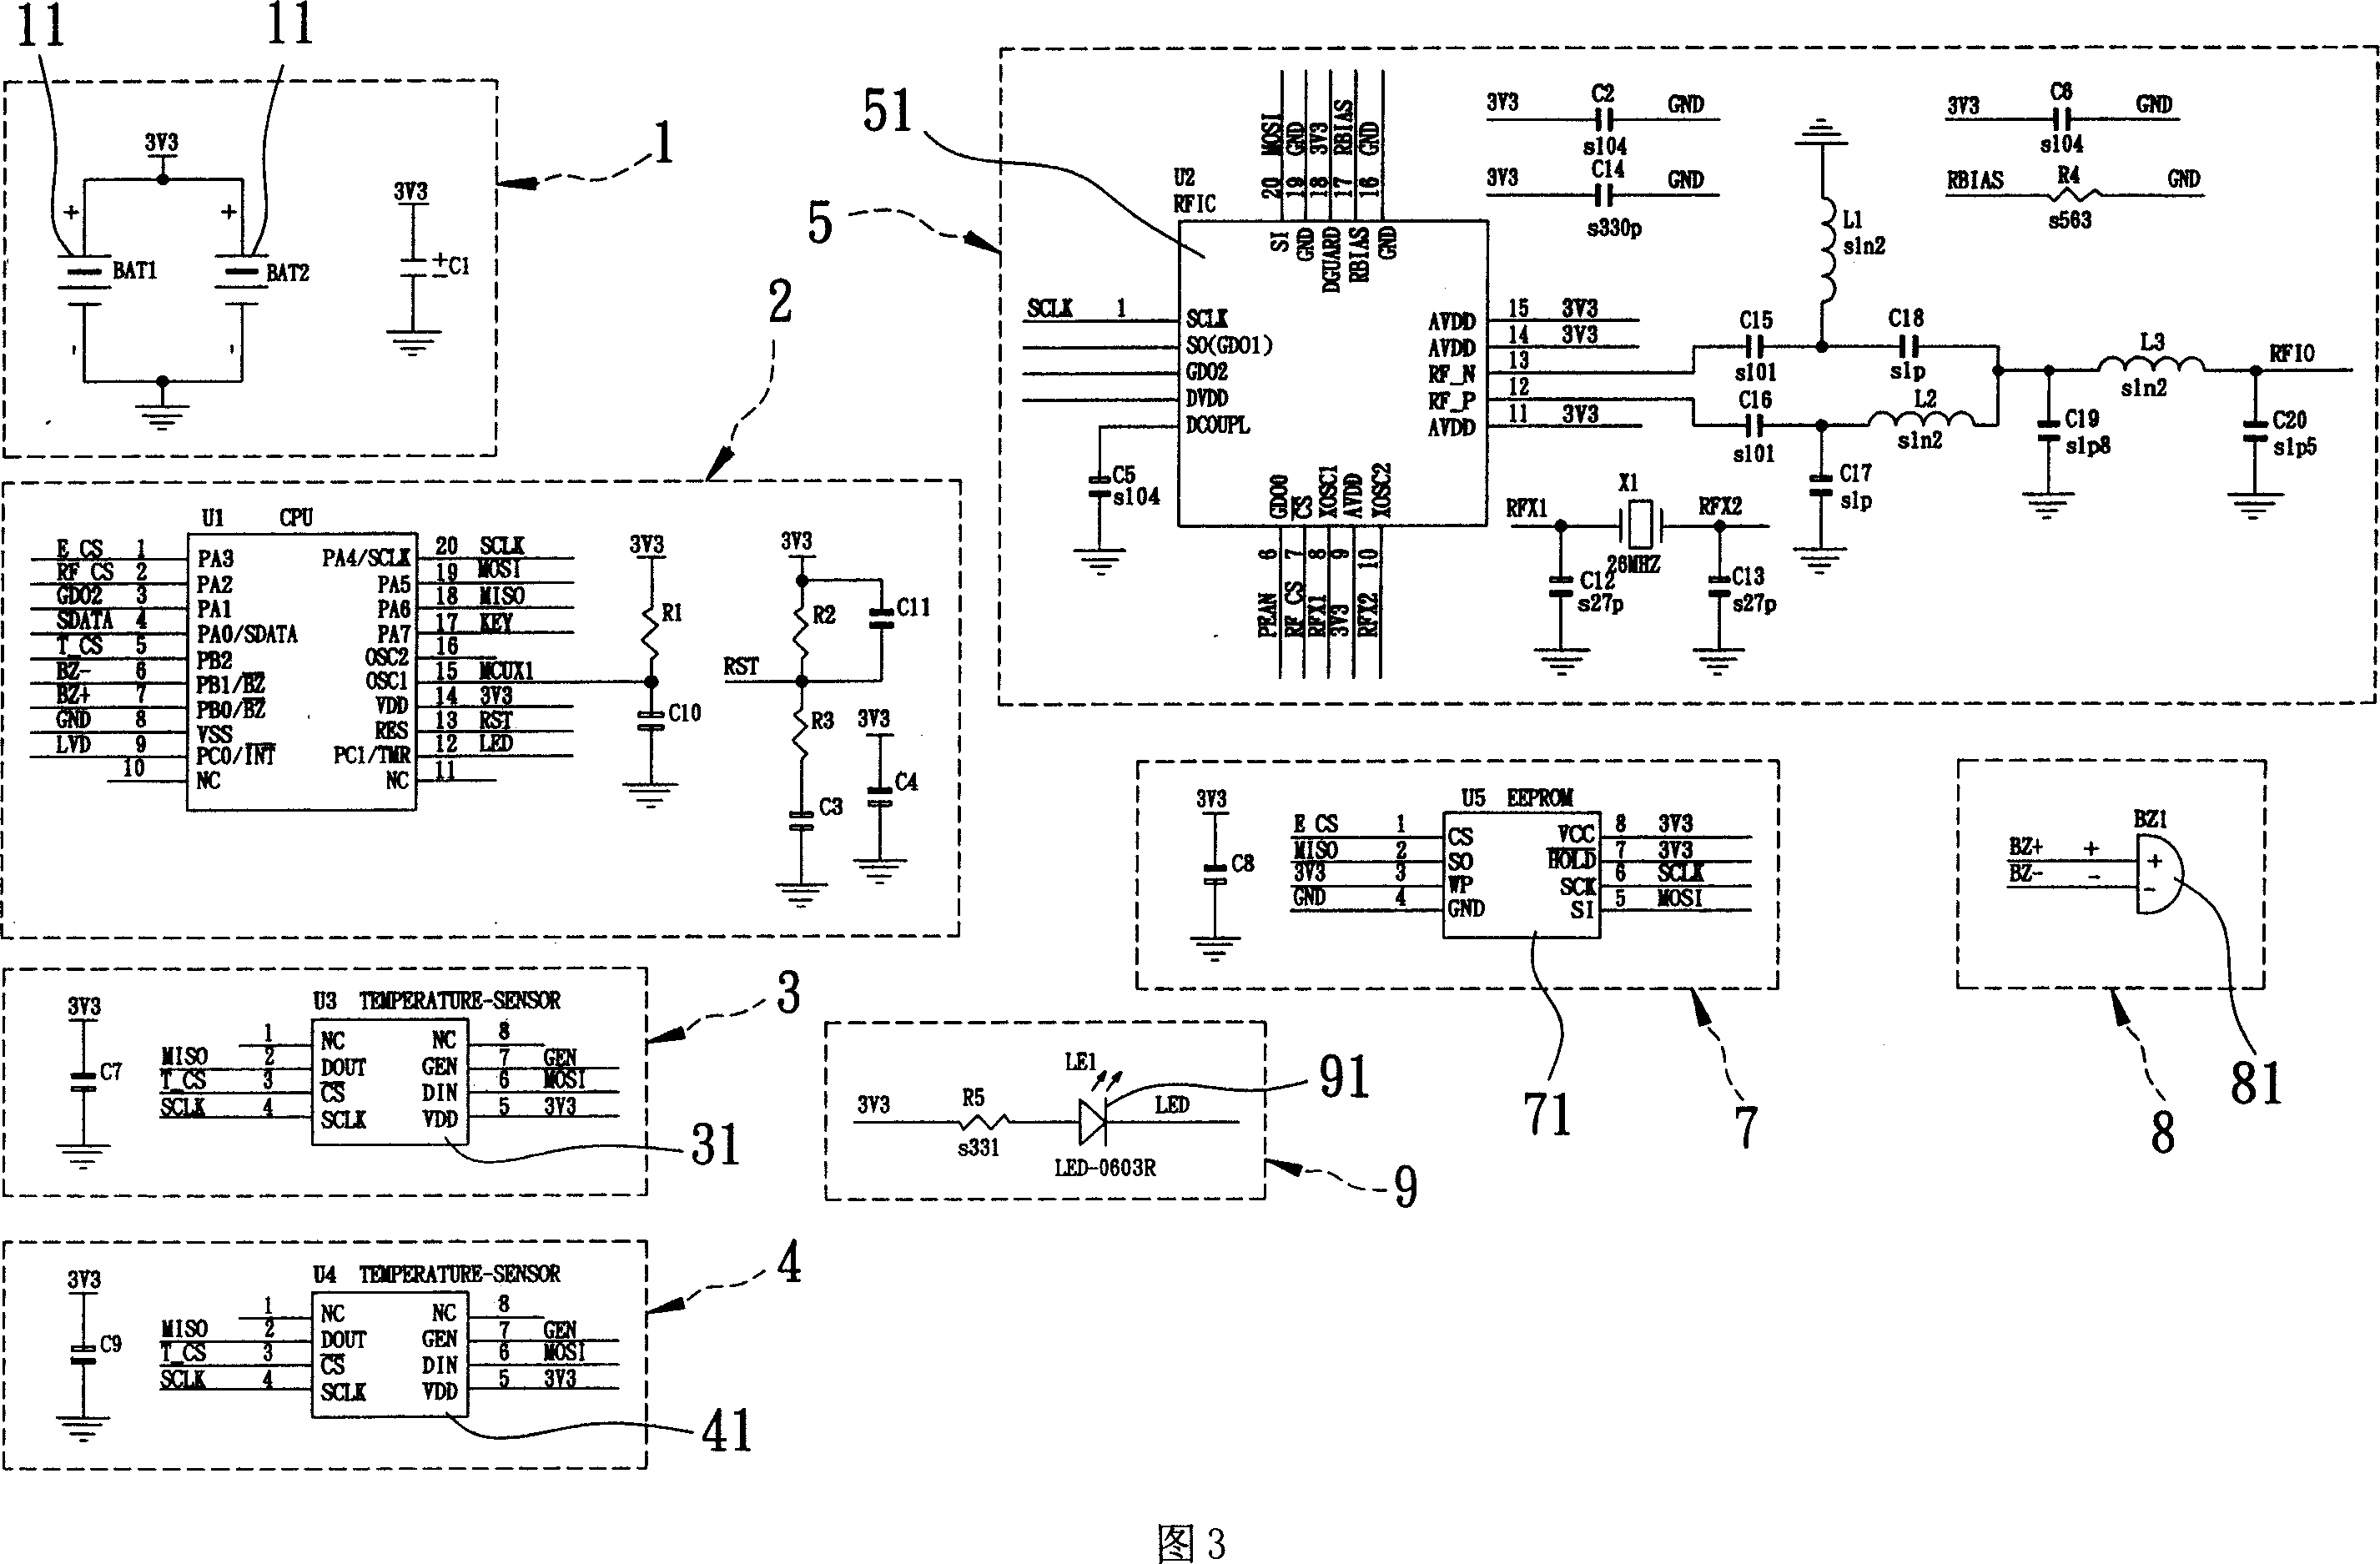 Radio body temperature monitoring and reporting system